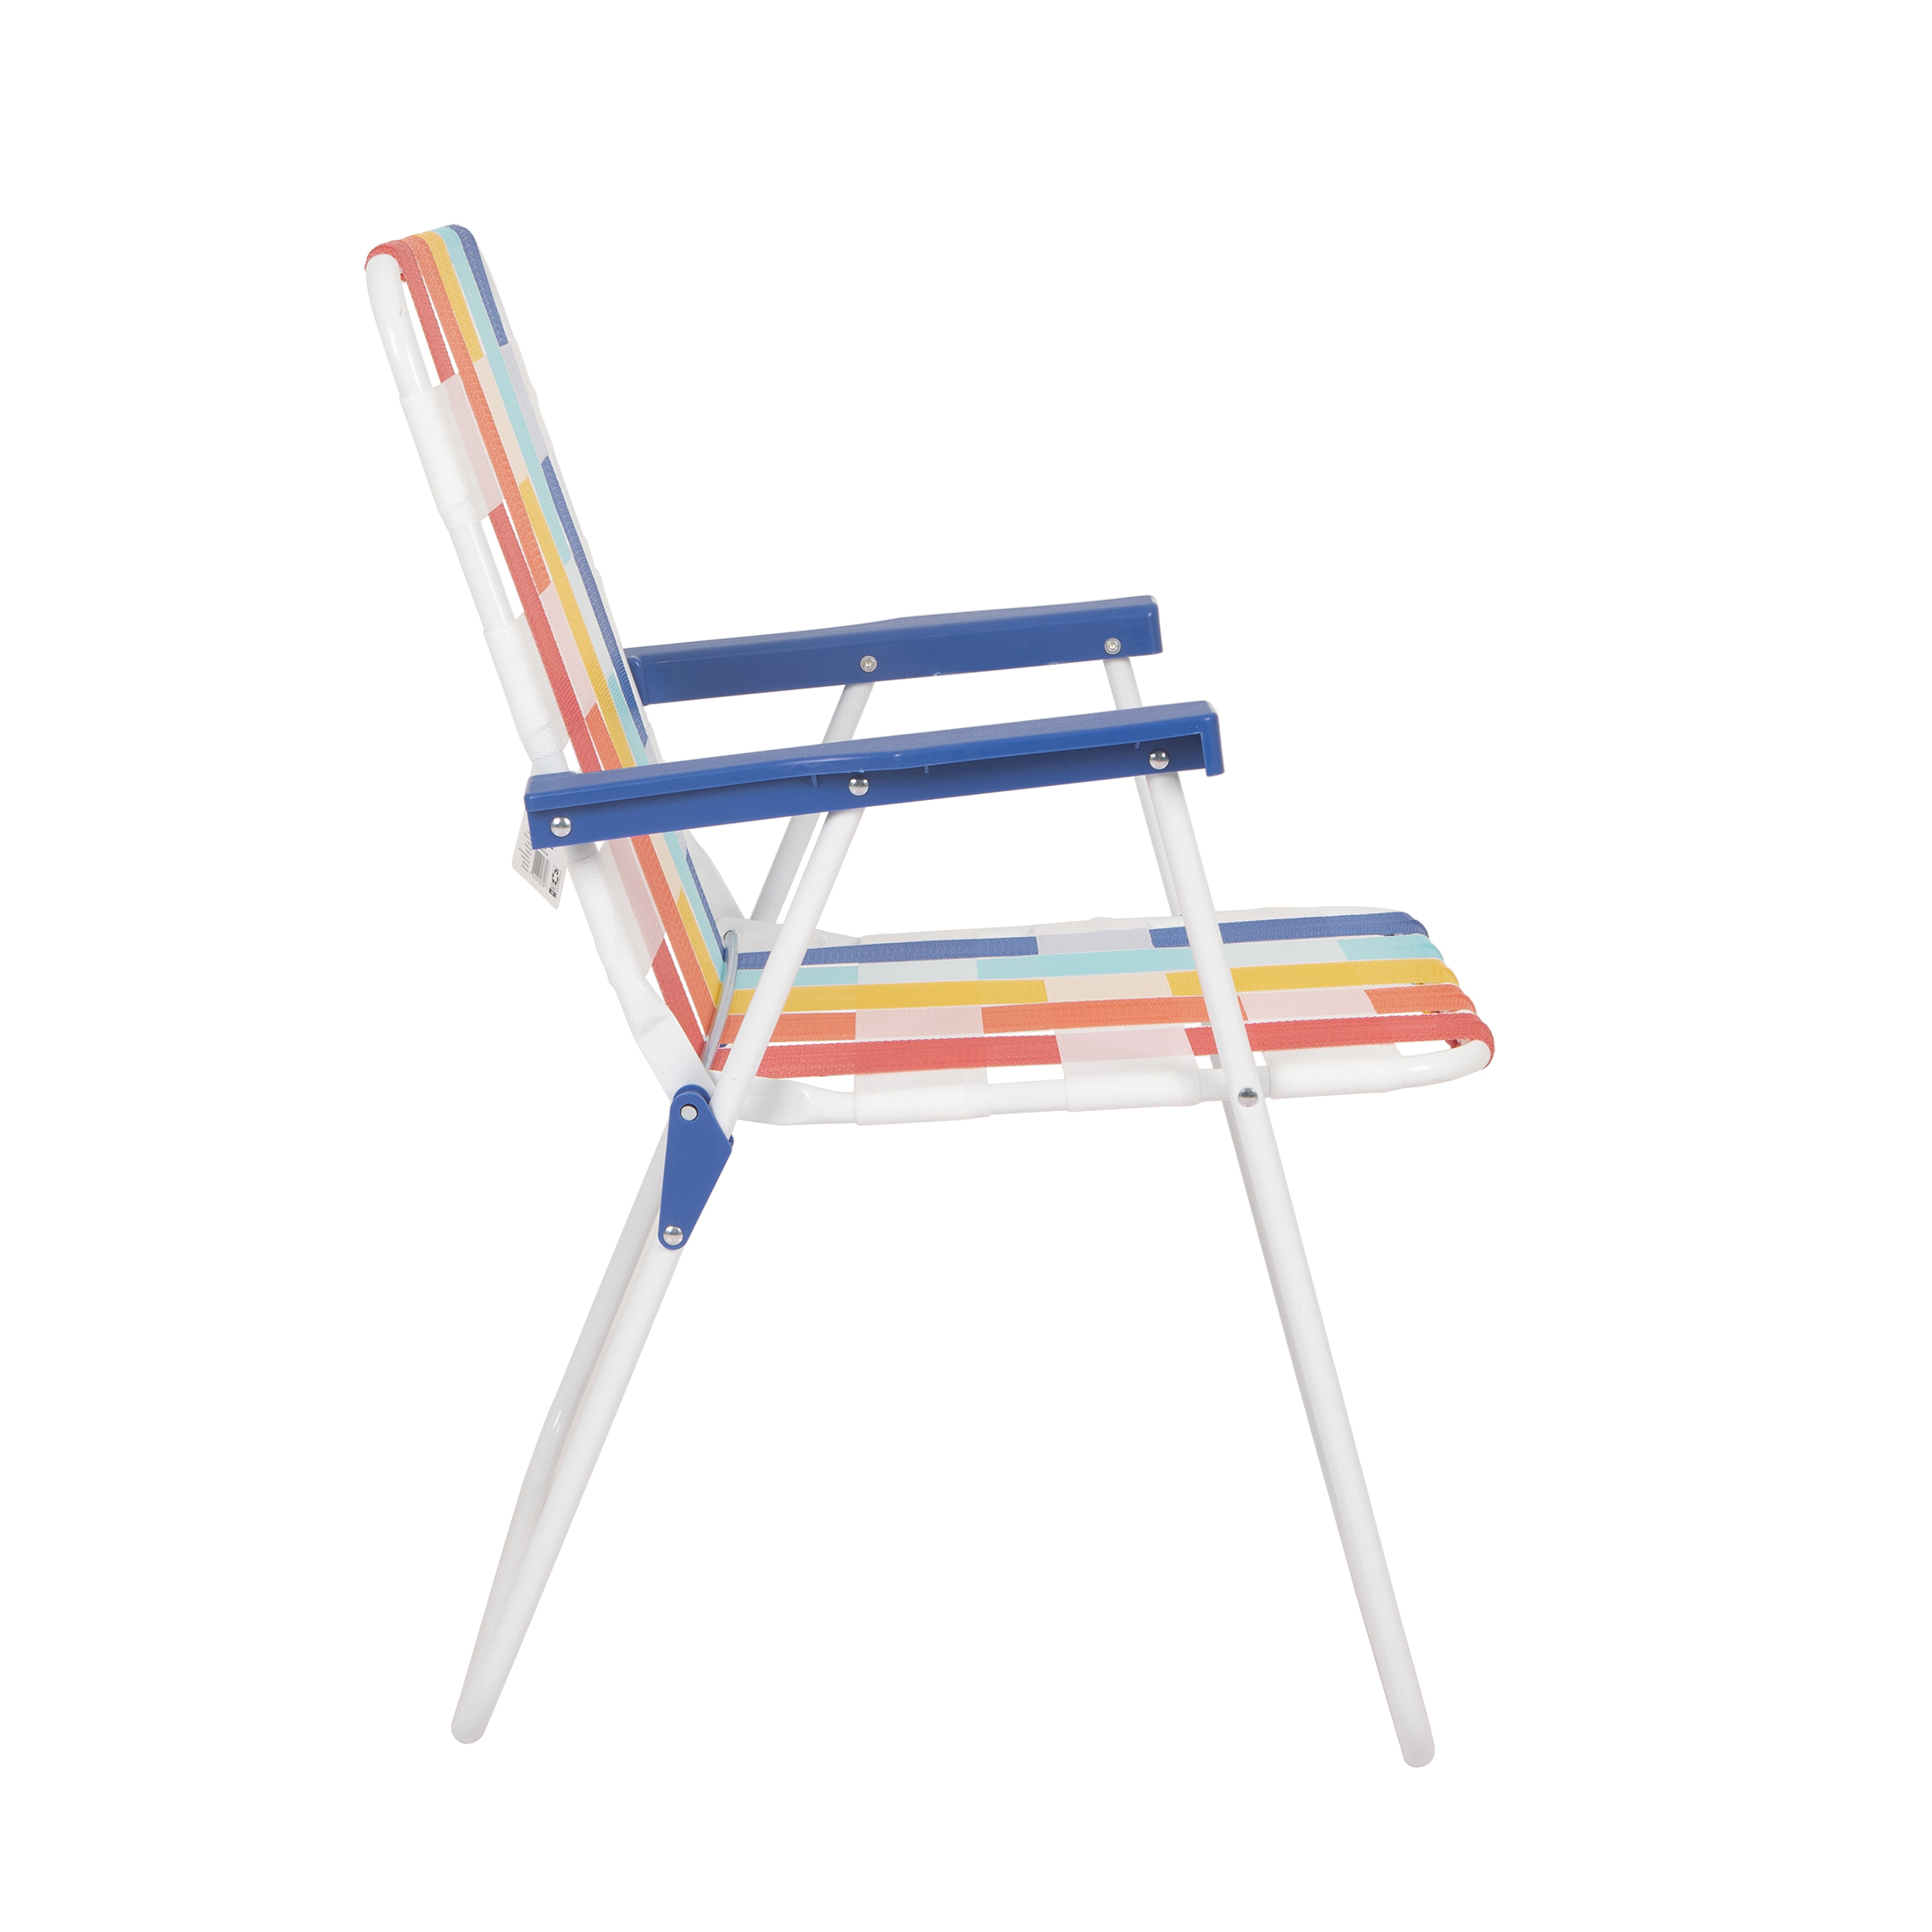 Mainstays Folding Beach Web Chair, Multicolor - image 5 of 9